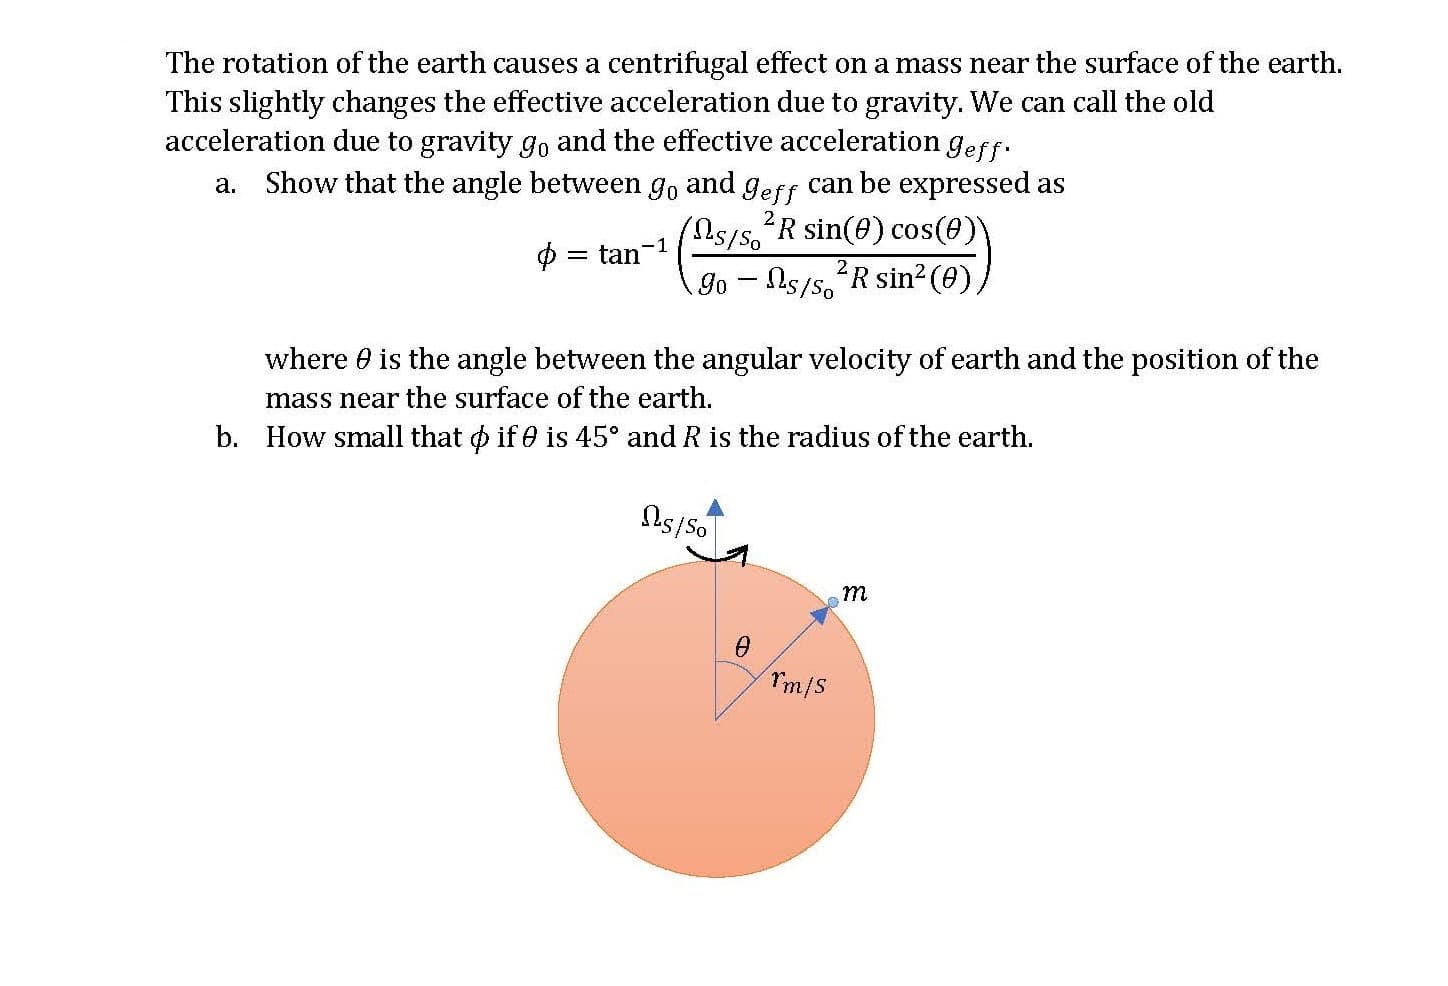 The rotation of the earth causes a centrifugal effect on a mass near the surface of the earth.
This slightly changes the effective acceleration due to gravity. We can call the old
acceleration due to gravity go and the effective acceleration geff.
a. Show that the angle between go and geff can be expressed as
/55'R sin(e) cos(0))
= tan
Go - Ns/s, R sin²(0)
where 0 is the angle between the angular velocity of earth and the position of the
mass near the surface of the earth.
b. How small that o if 0 is 45° and R is the radius of the earth.
m
Tm/S
